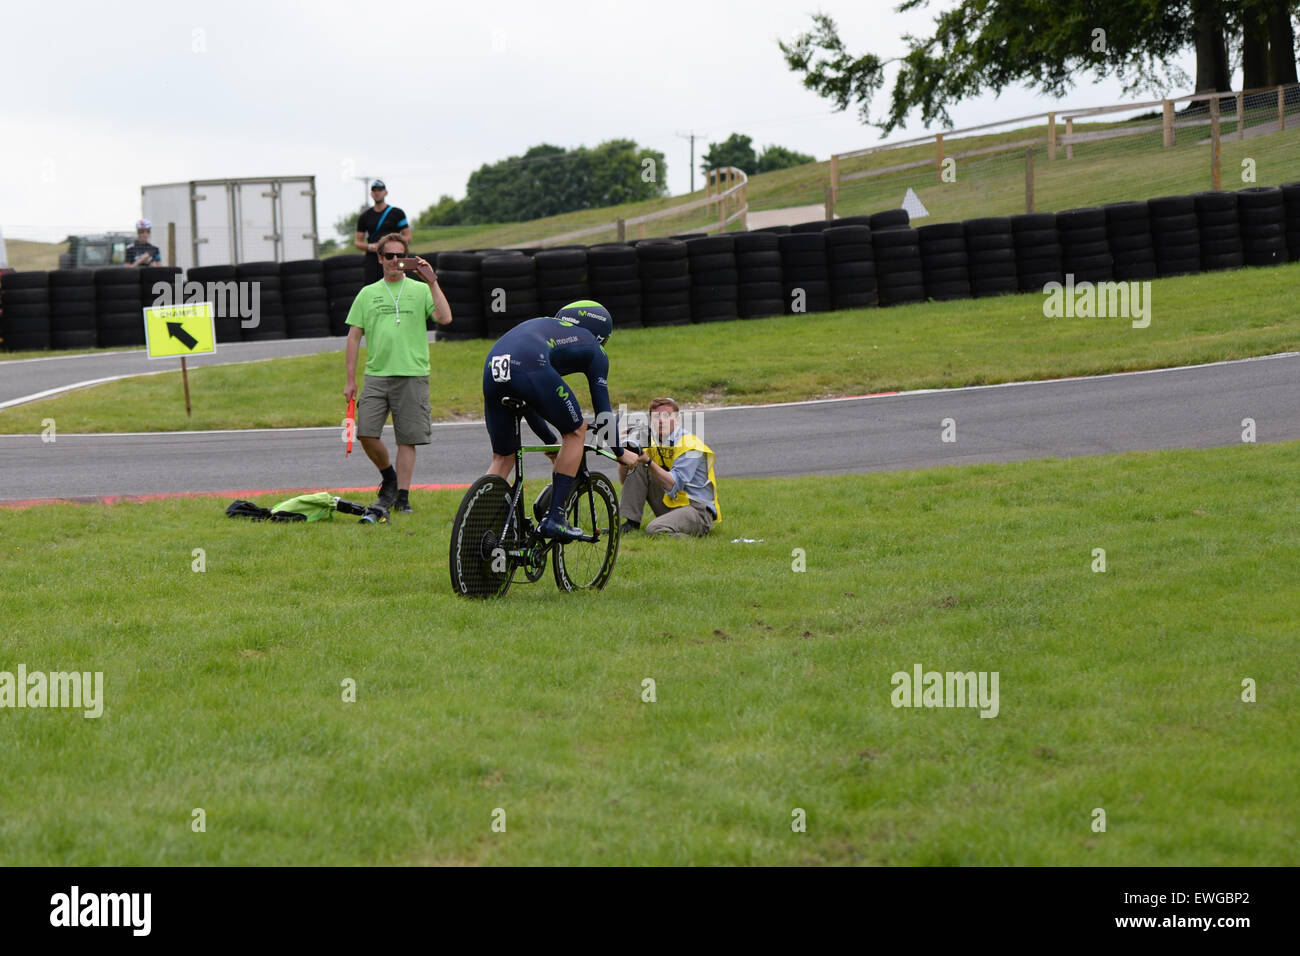 Lincoln, UK. 25th June, 2015. Alex Dowsett overshoots a corner at the British Cycling Time Trial Championships at Cadwell Park near Lincoln, United Kingdom on 25 June 2015. Dowsett won the race by over three minutes. Credit:  Andrew Peat/Alamy Live News Stock Photo